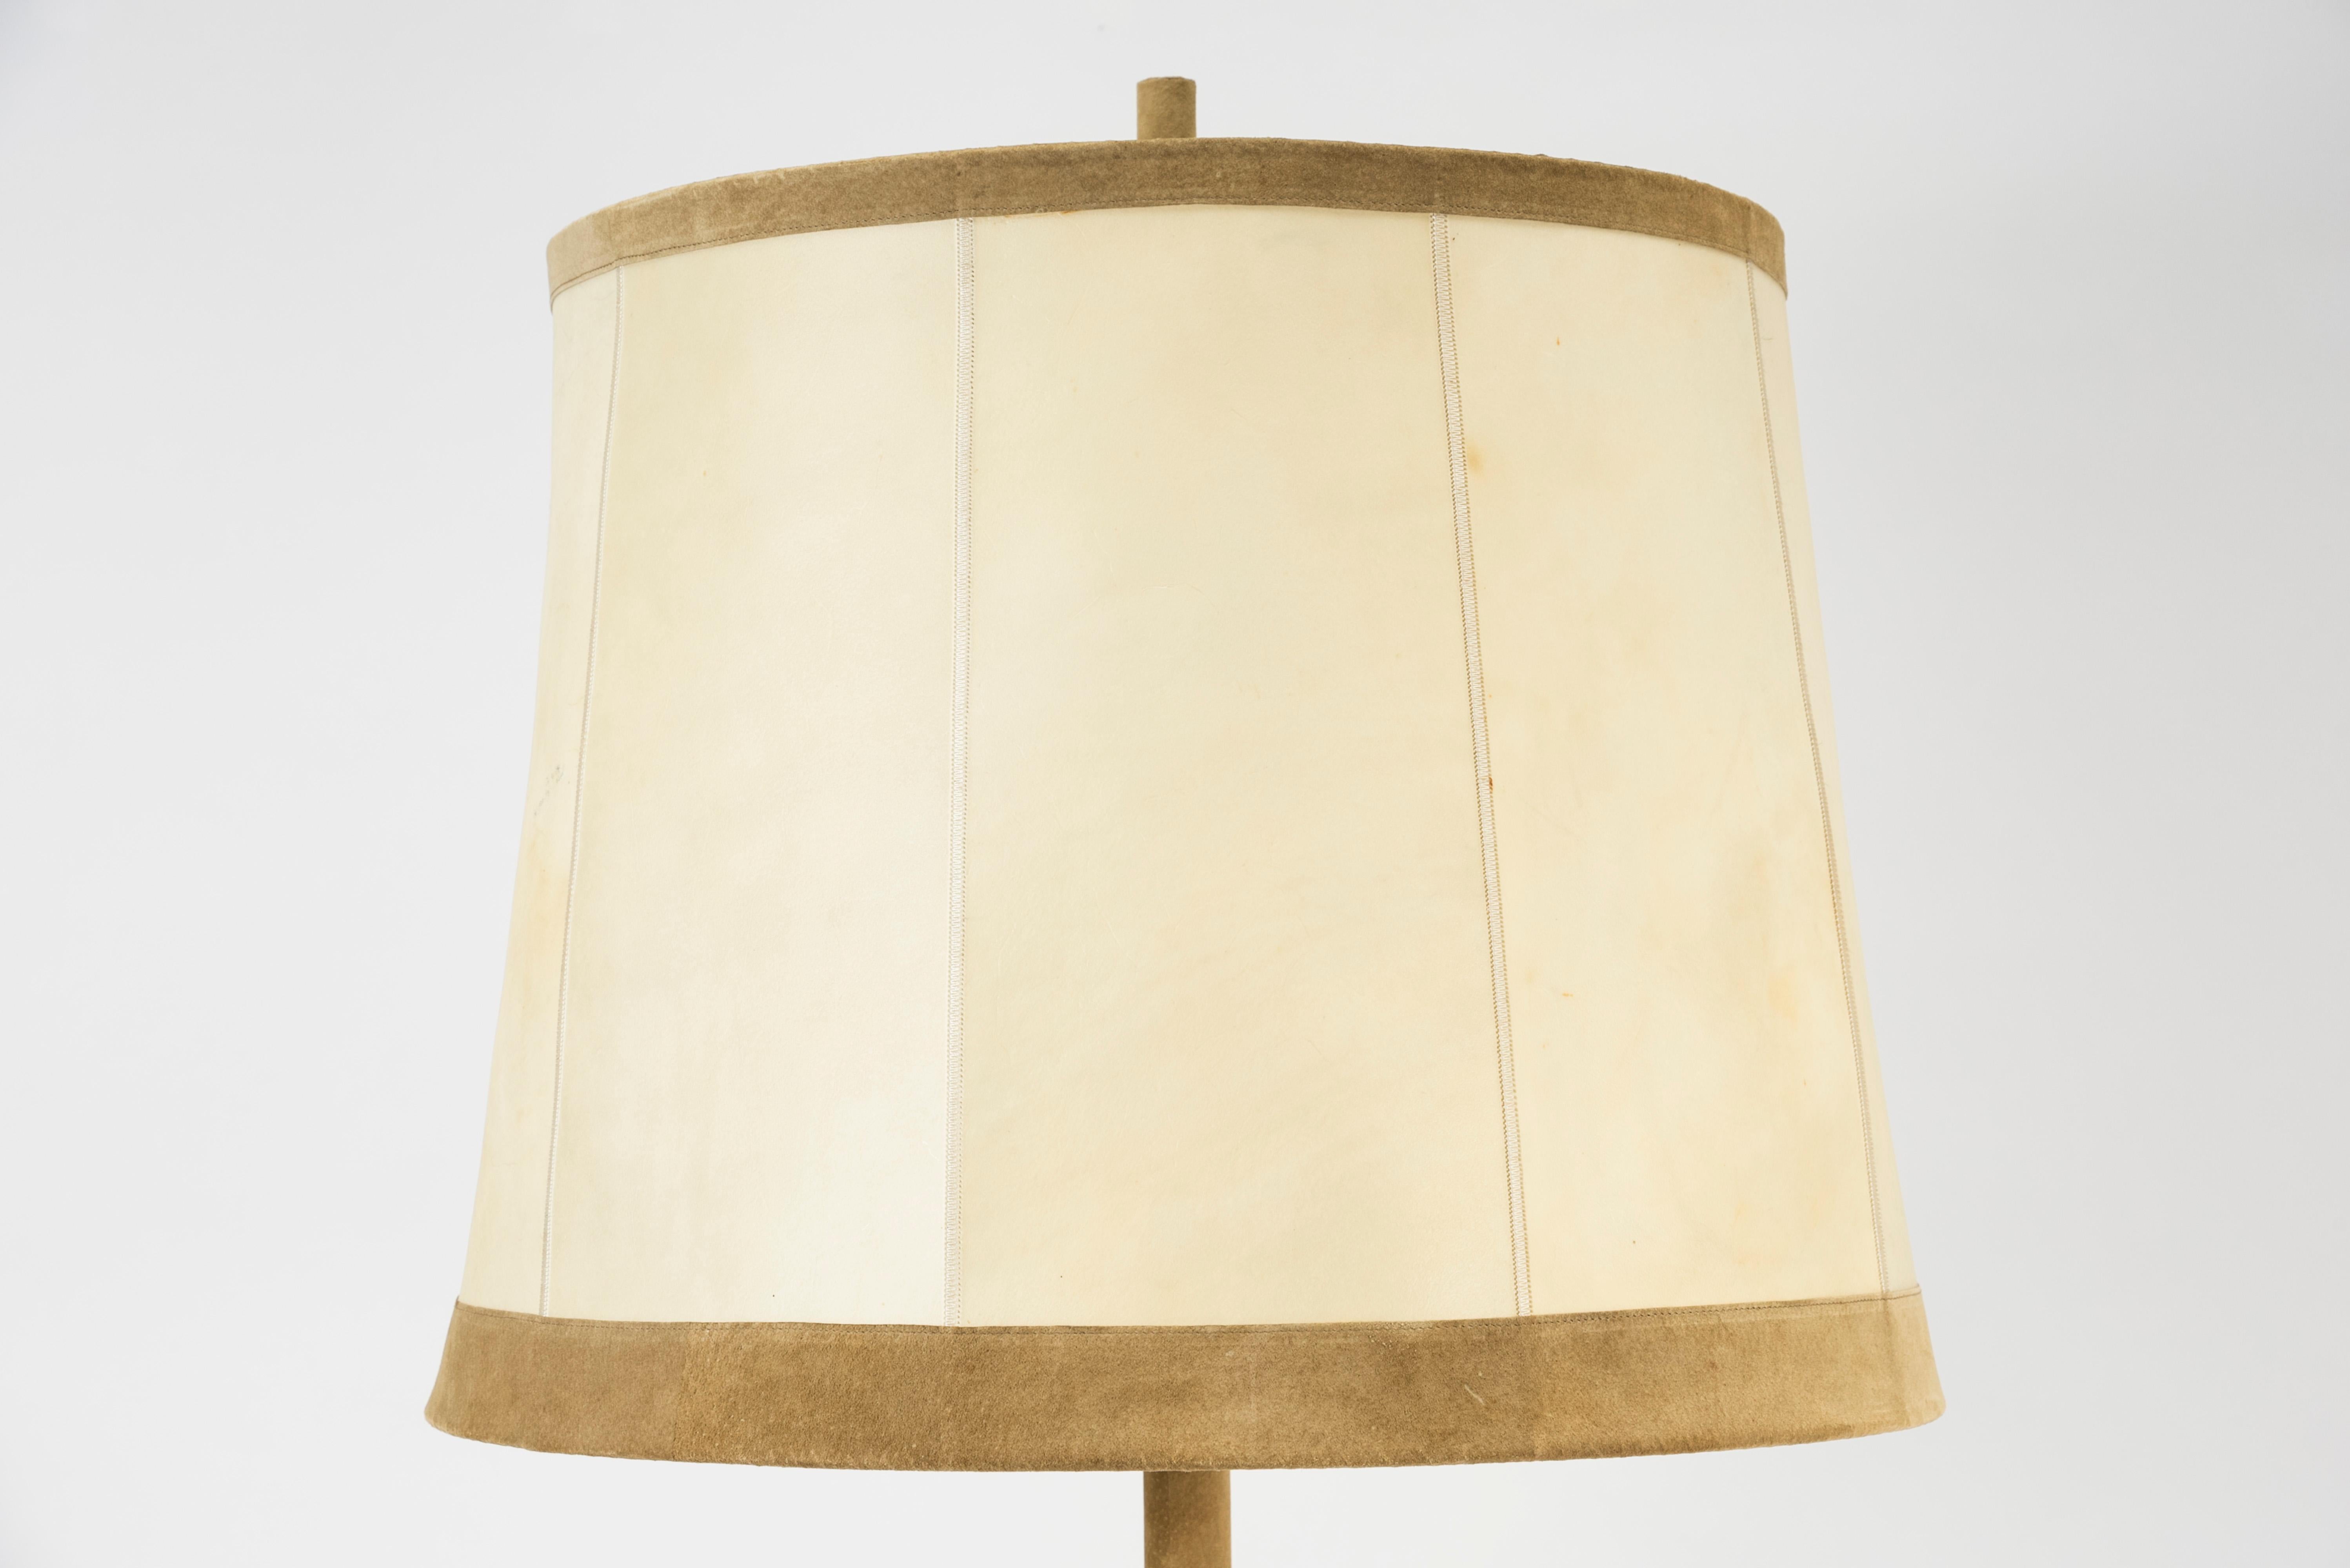 Floor lamp covered with suede and parchment shade
circa 1960
Dimensions given without shade
Shade diameter 56 cm, high 45 cm.